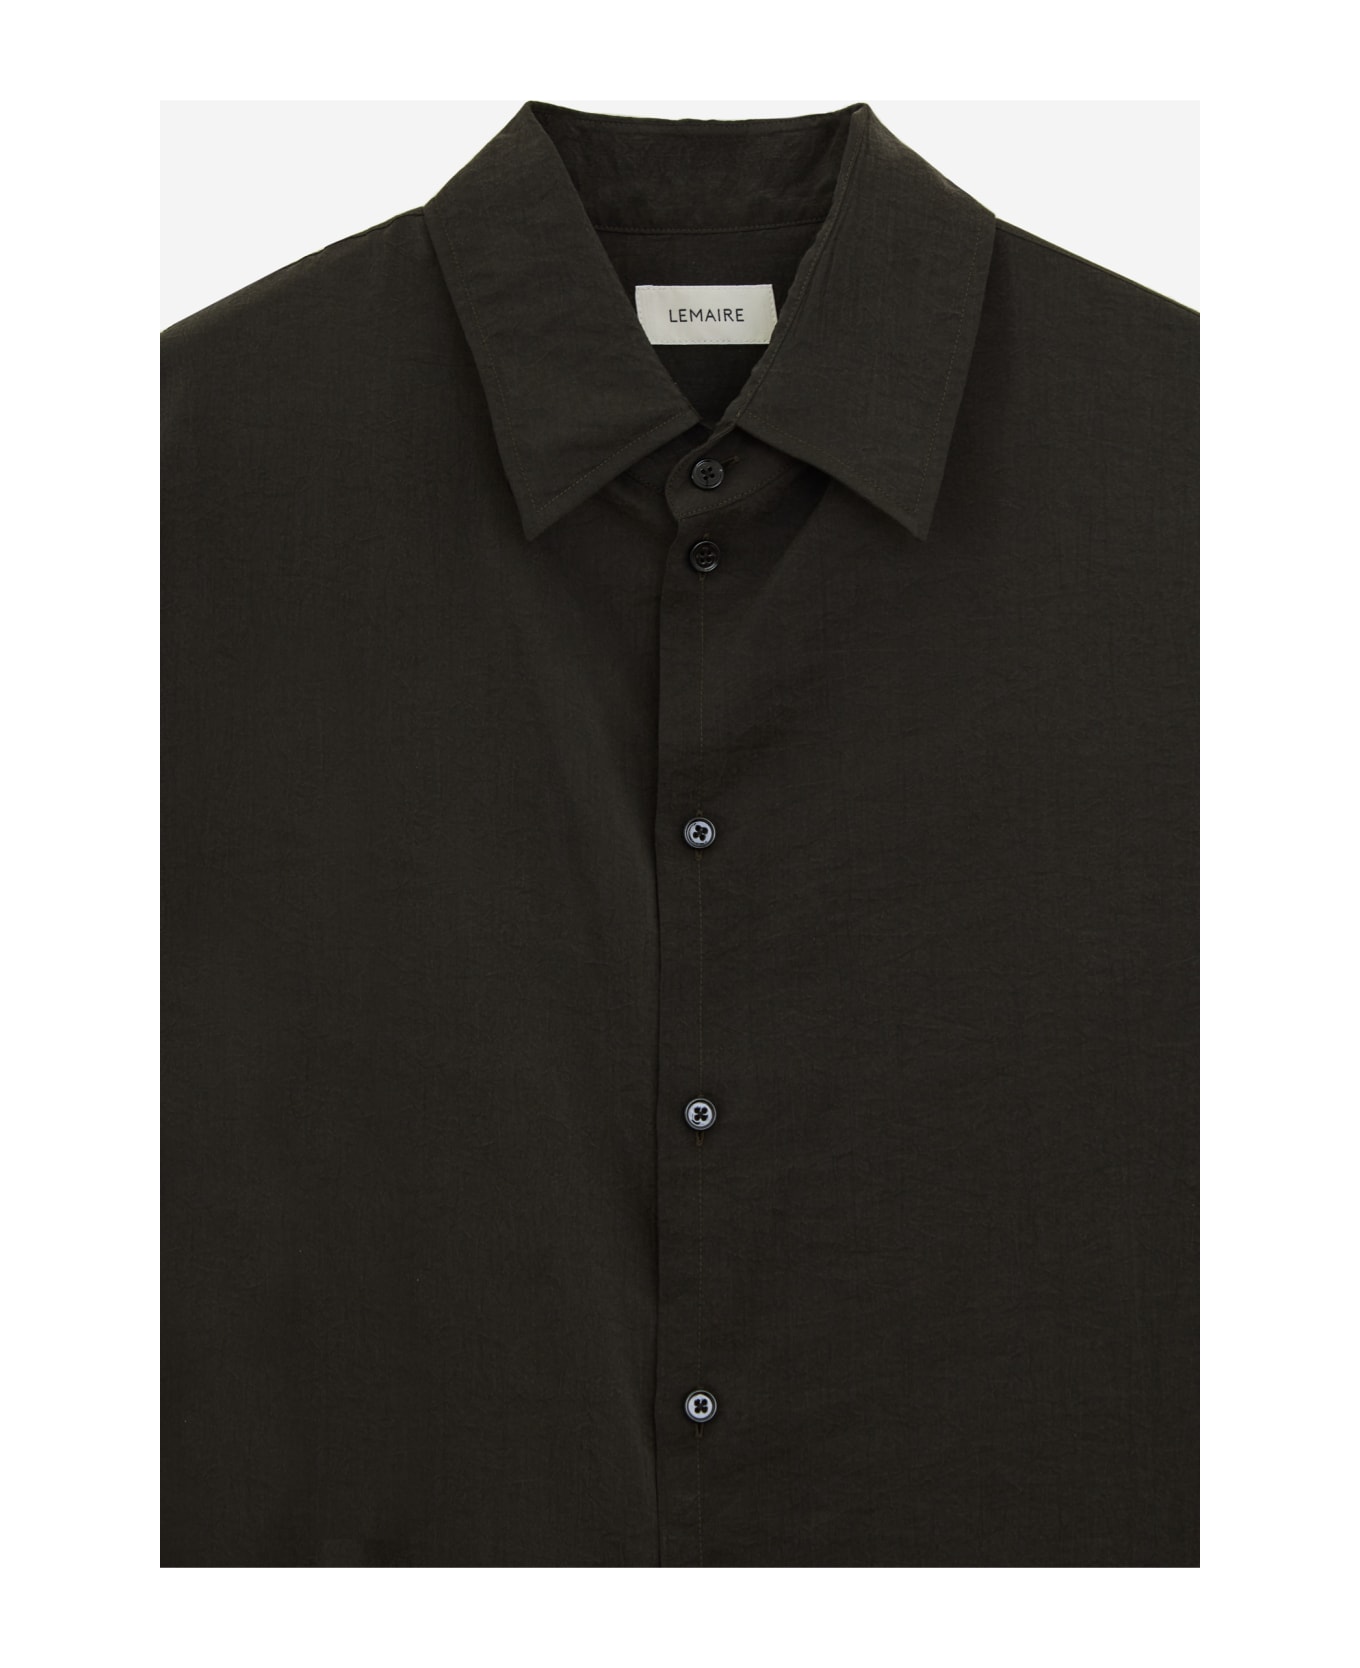 Lemaire Twisted Shirt Shirt - brown